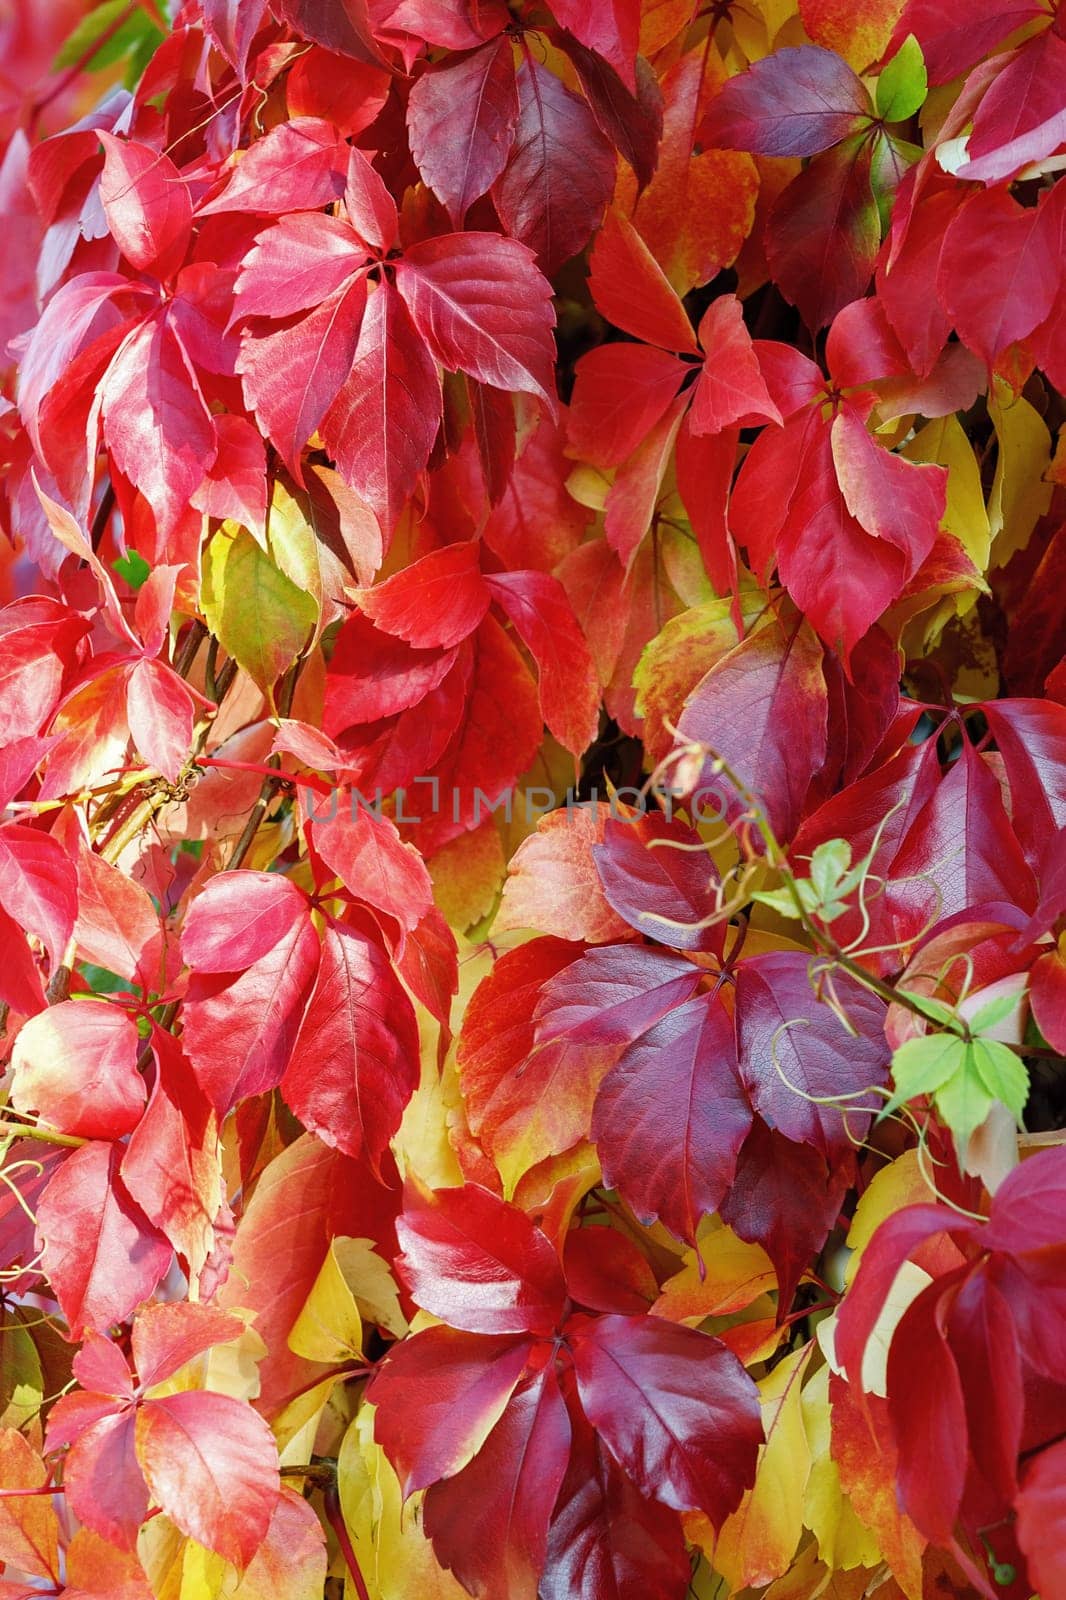 Palmate leaves of Parthenocissus quinquefolia in purple, green, yellow and red in October. by Lincikas